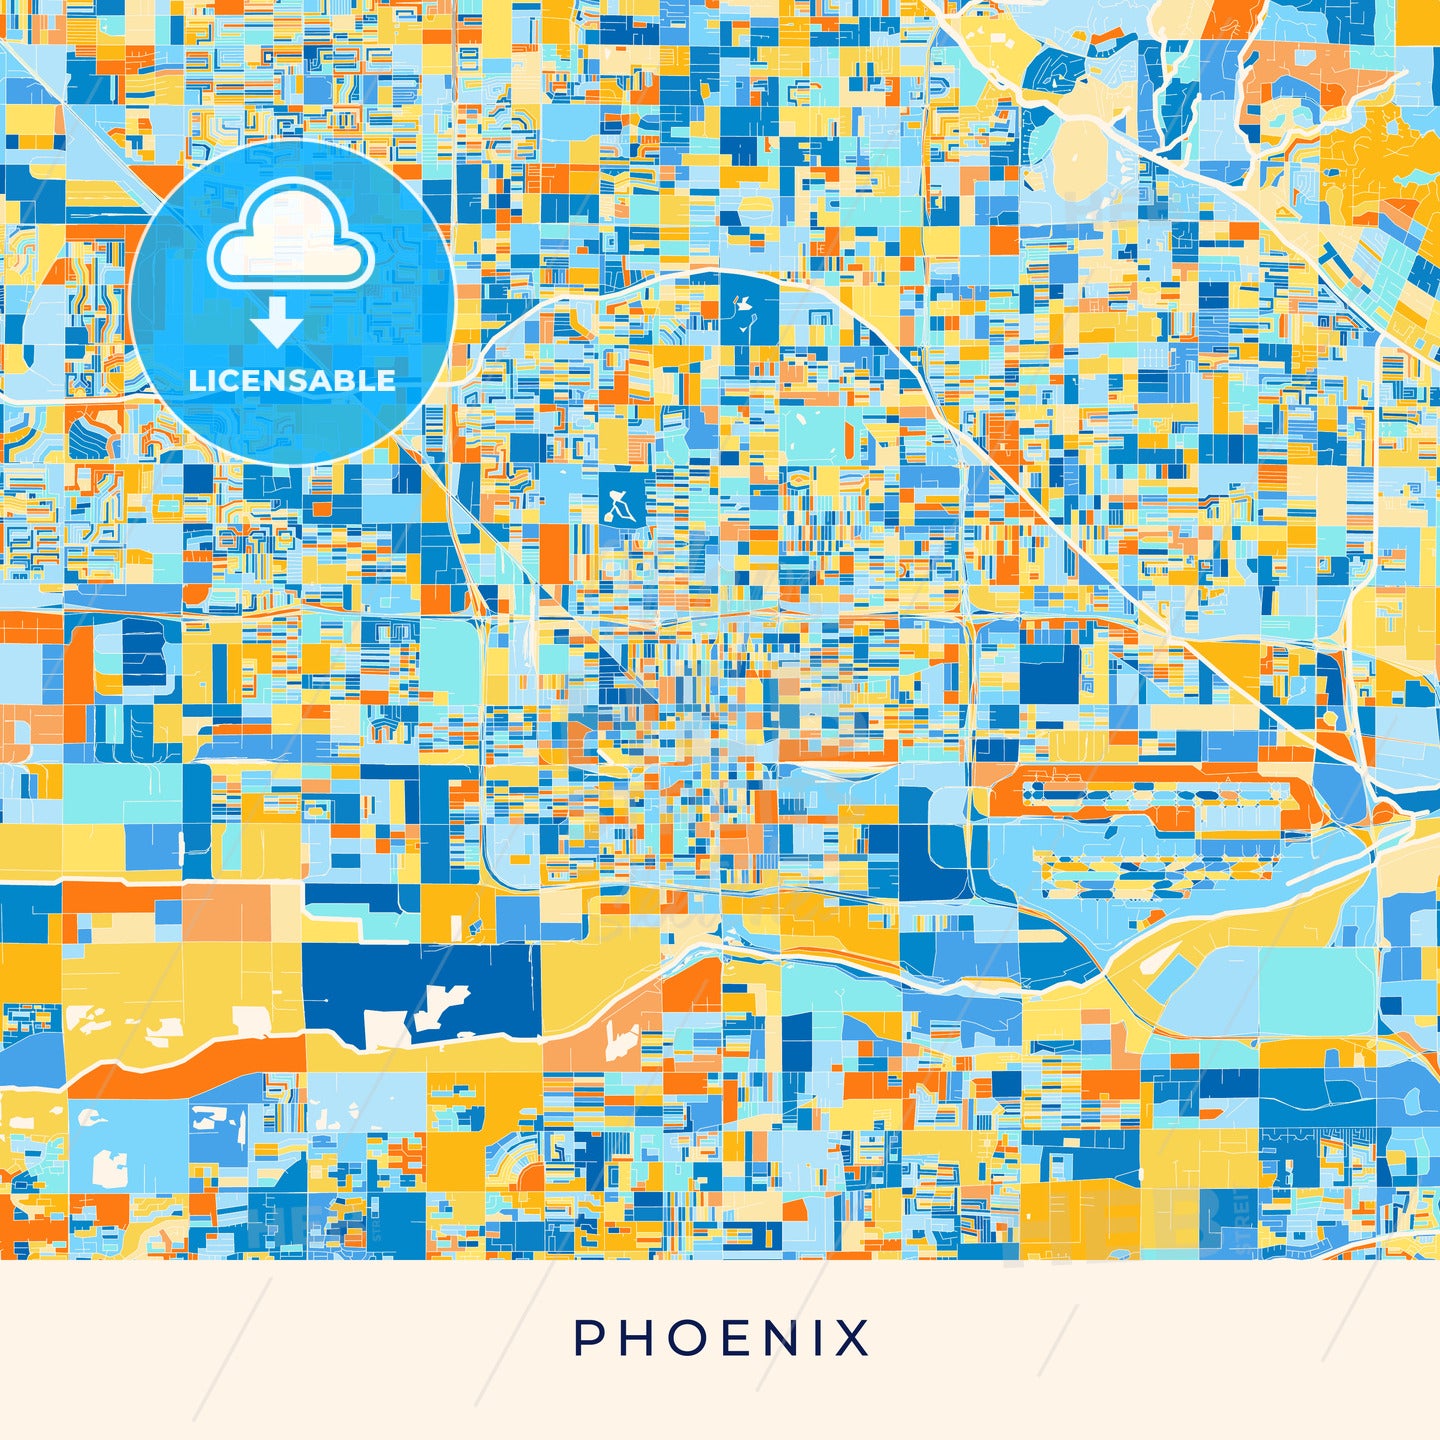 Phoenix colorful map poster template